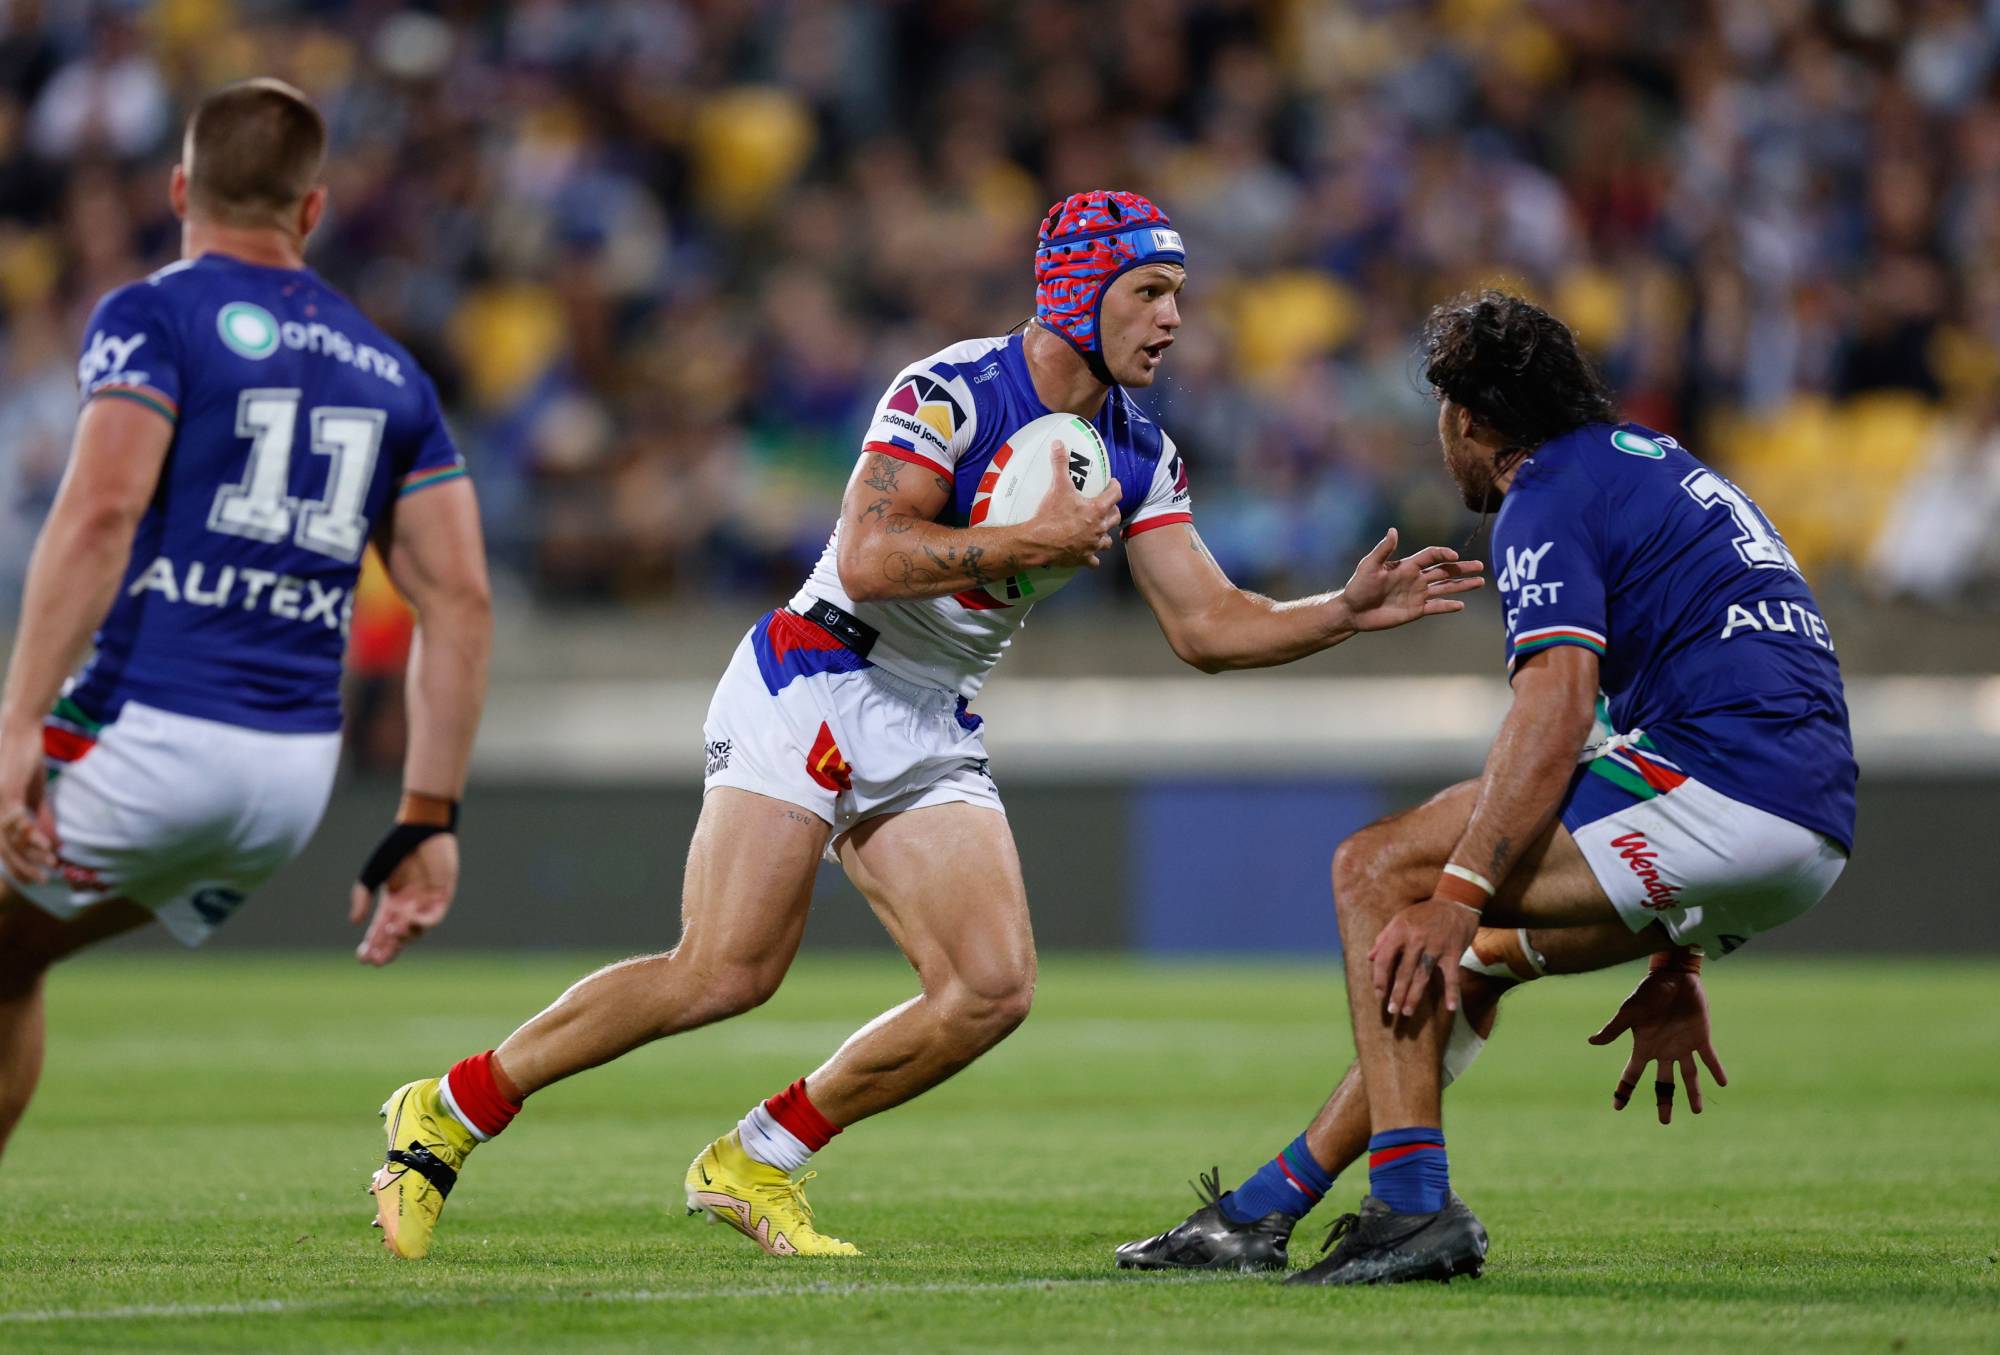 Kalyn Ponga of the Knights takes a break during the NRL first round game between New Zealand Warriors and Newcastle Knights at Sky Stadium on March 03, 2023 in Wellington, New Zealand.